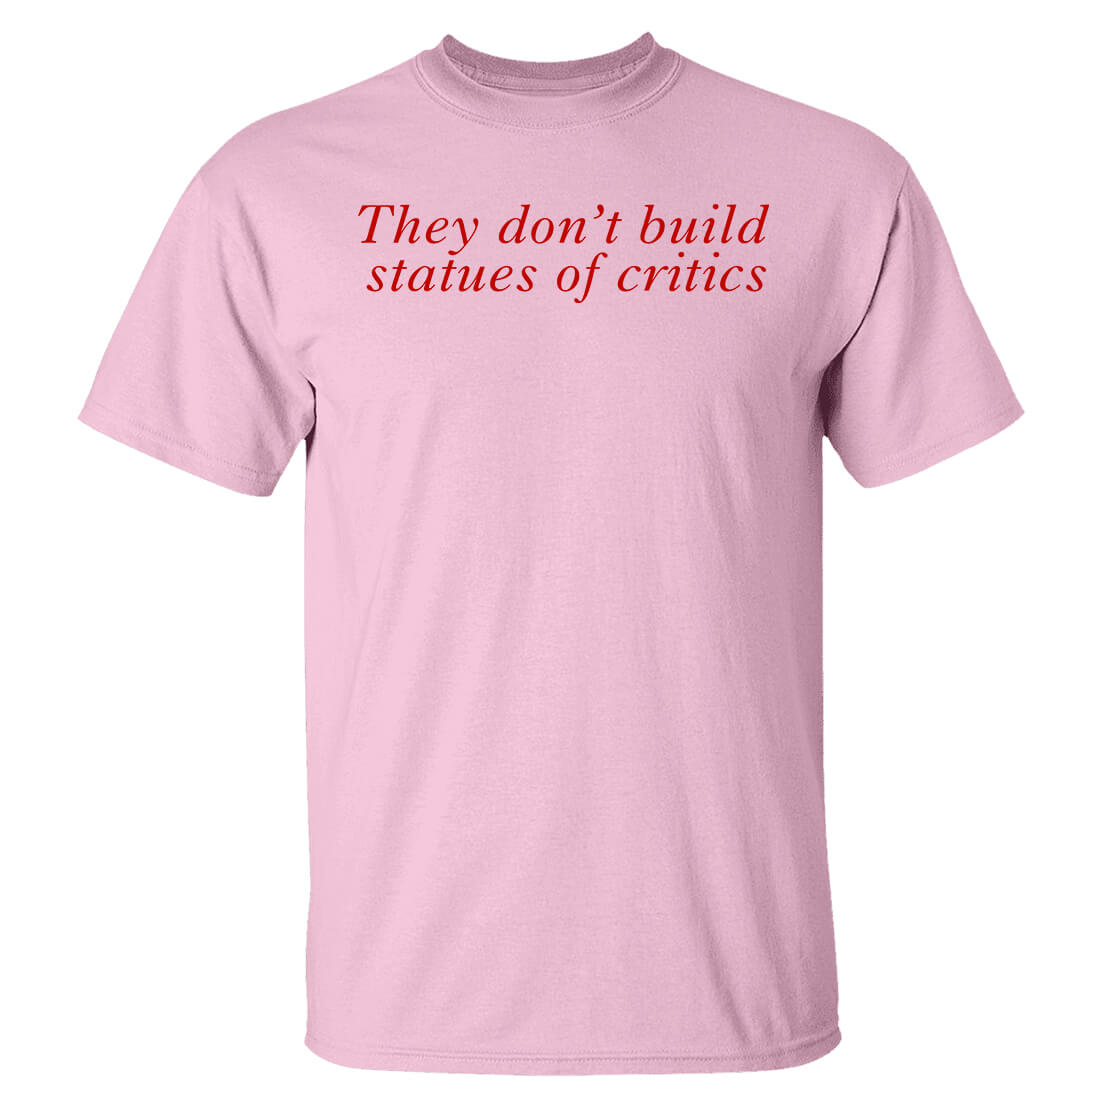 Charli Xcx Updates They Don’t Build Statues Of Critics Shirt